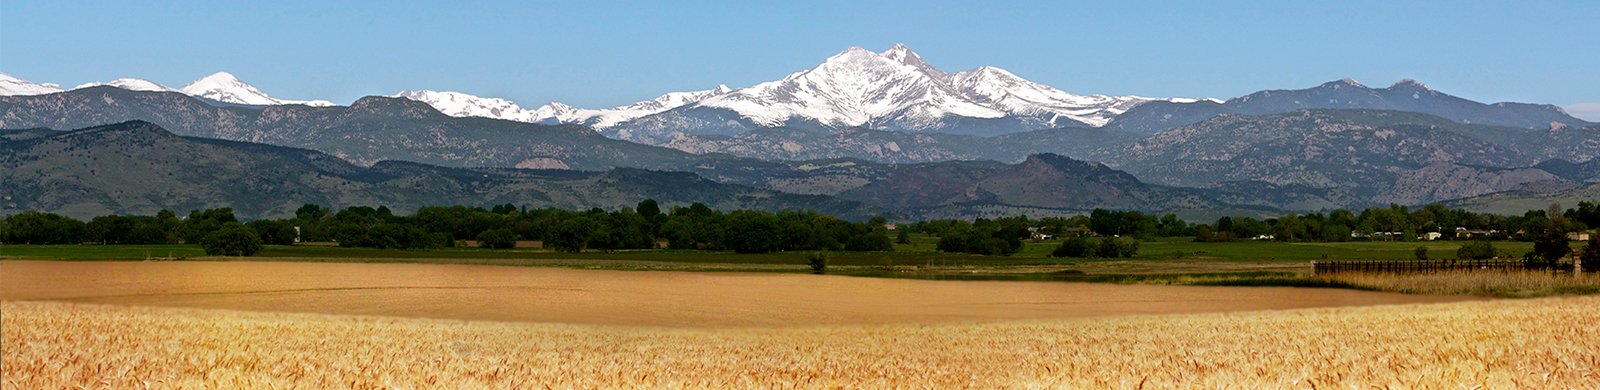 Longs Peak with wheat field in the foreground